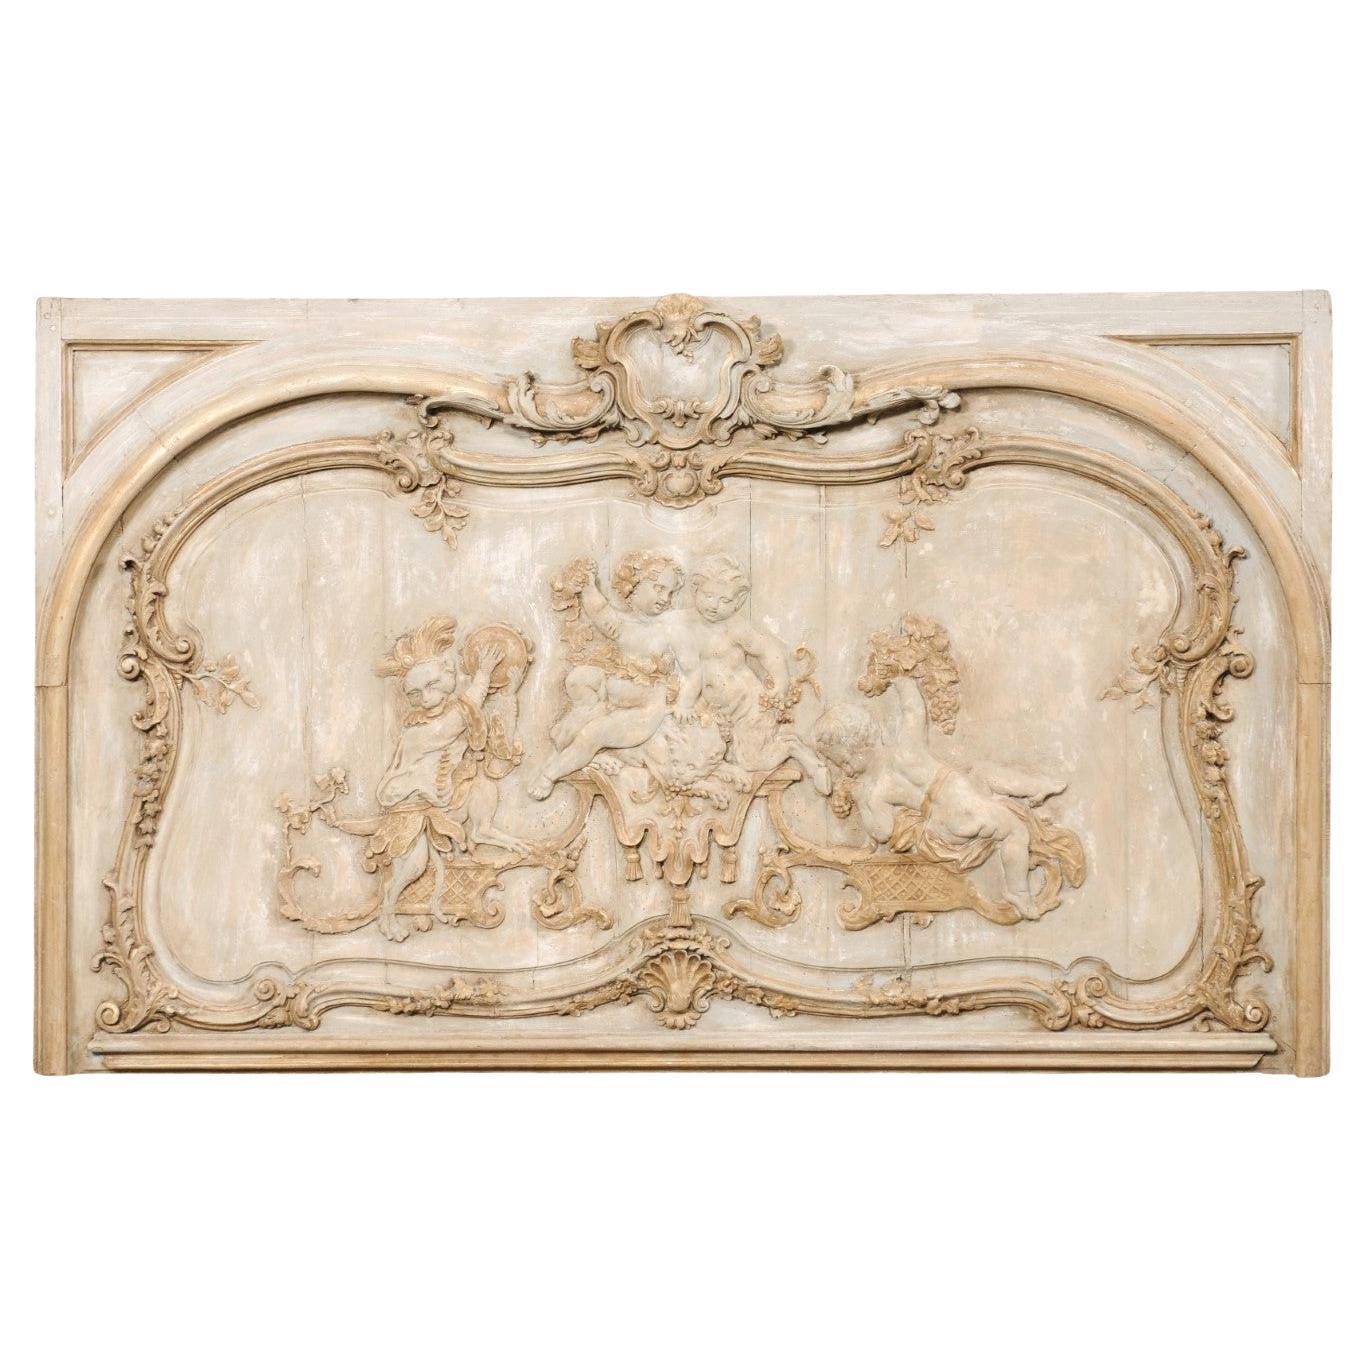 19th C. French "Putti" Motif Decorative Wood Panel- Would be a Lavish Headboard! For Sale